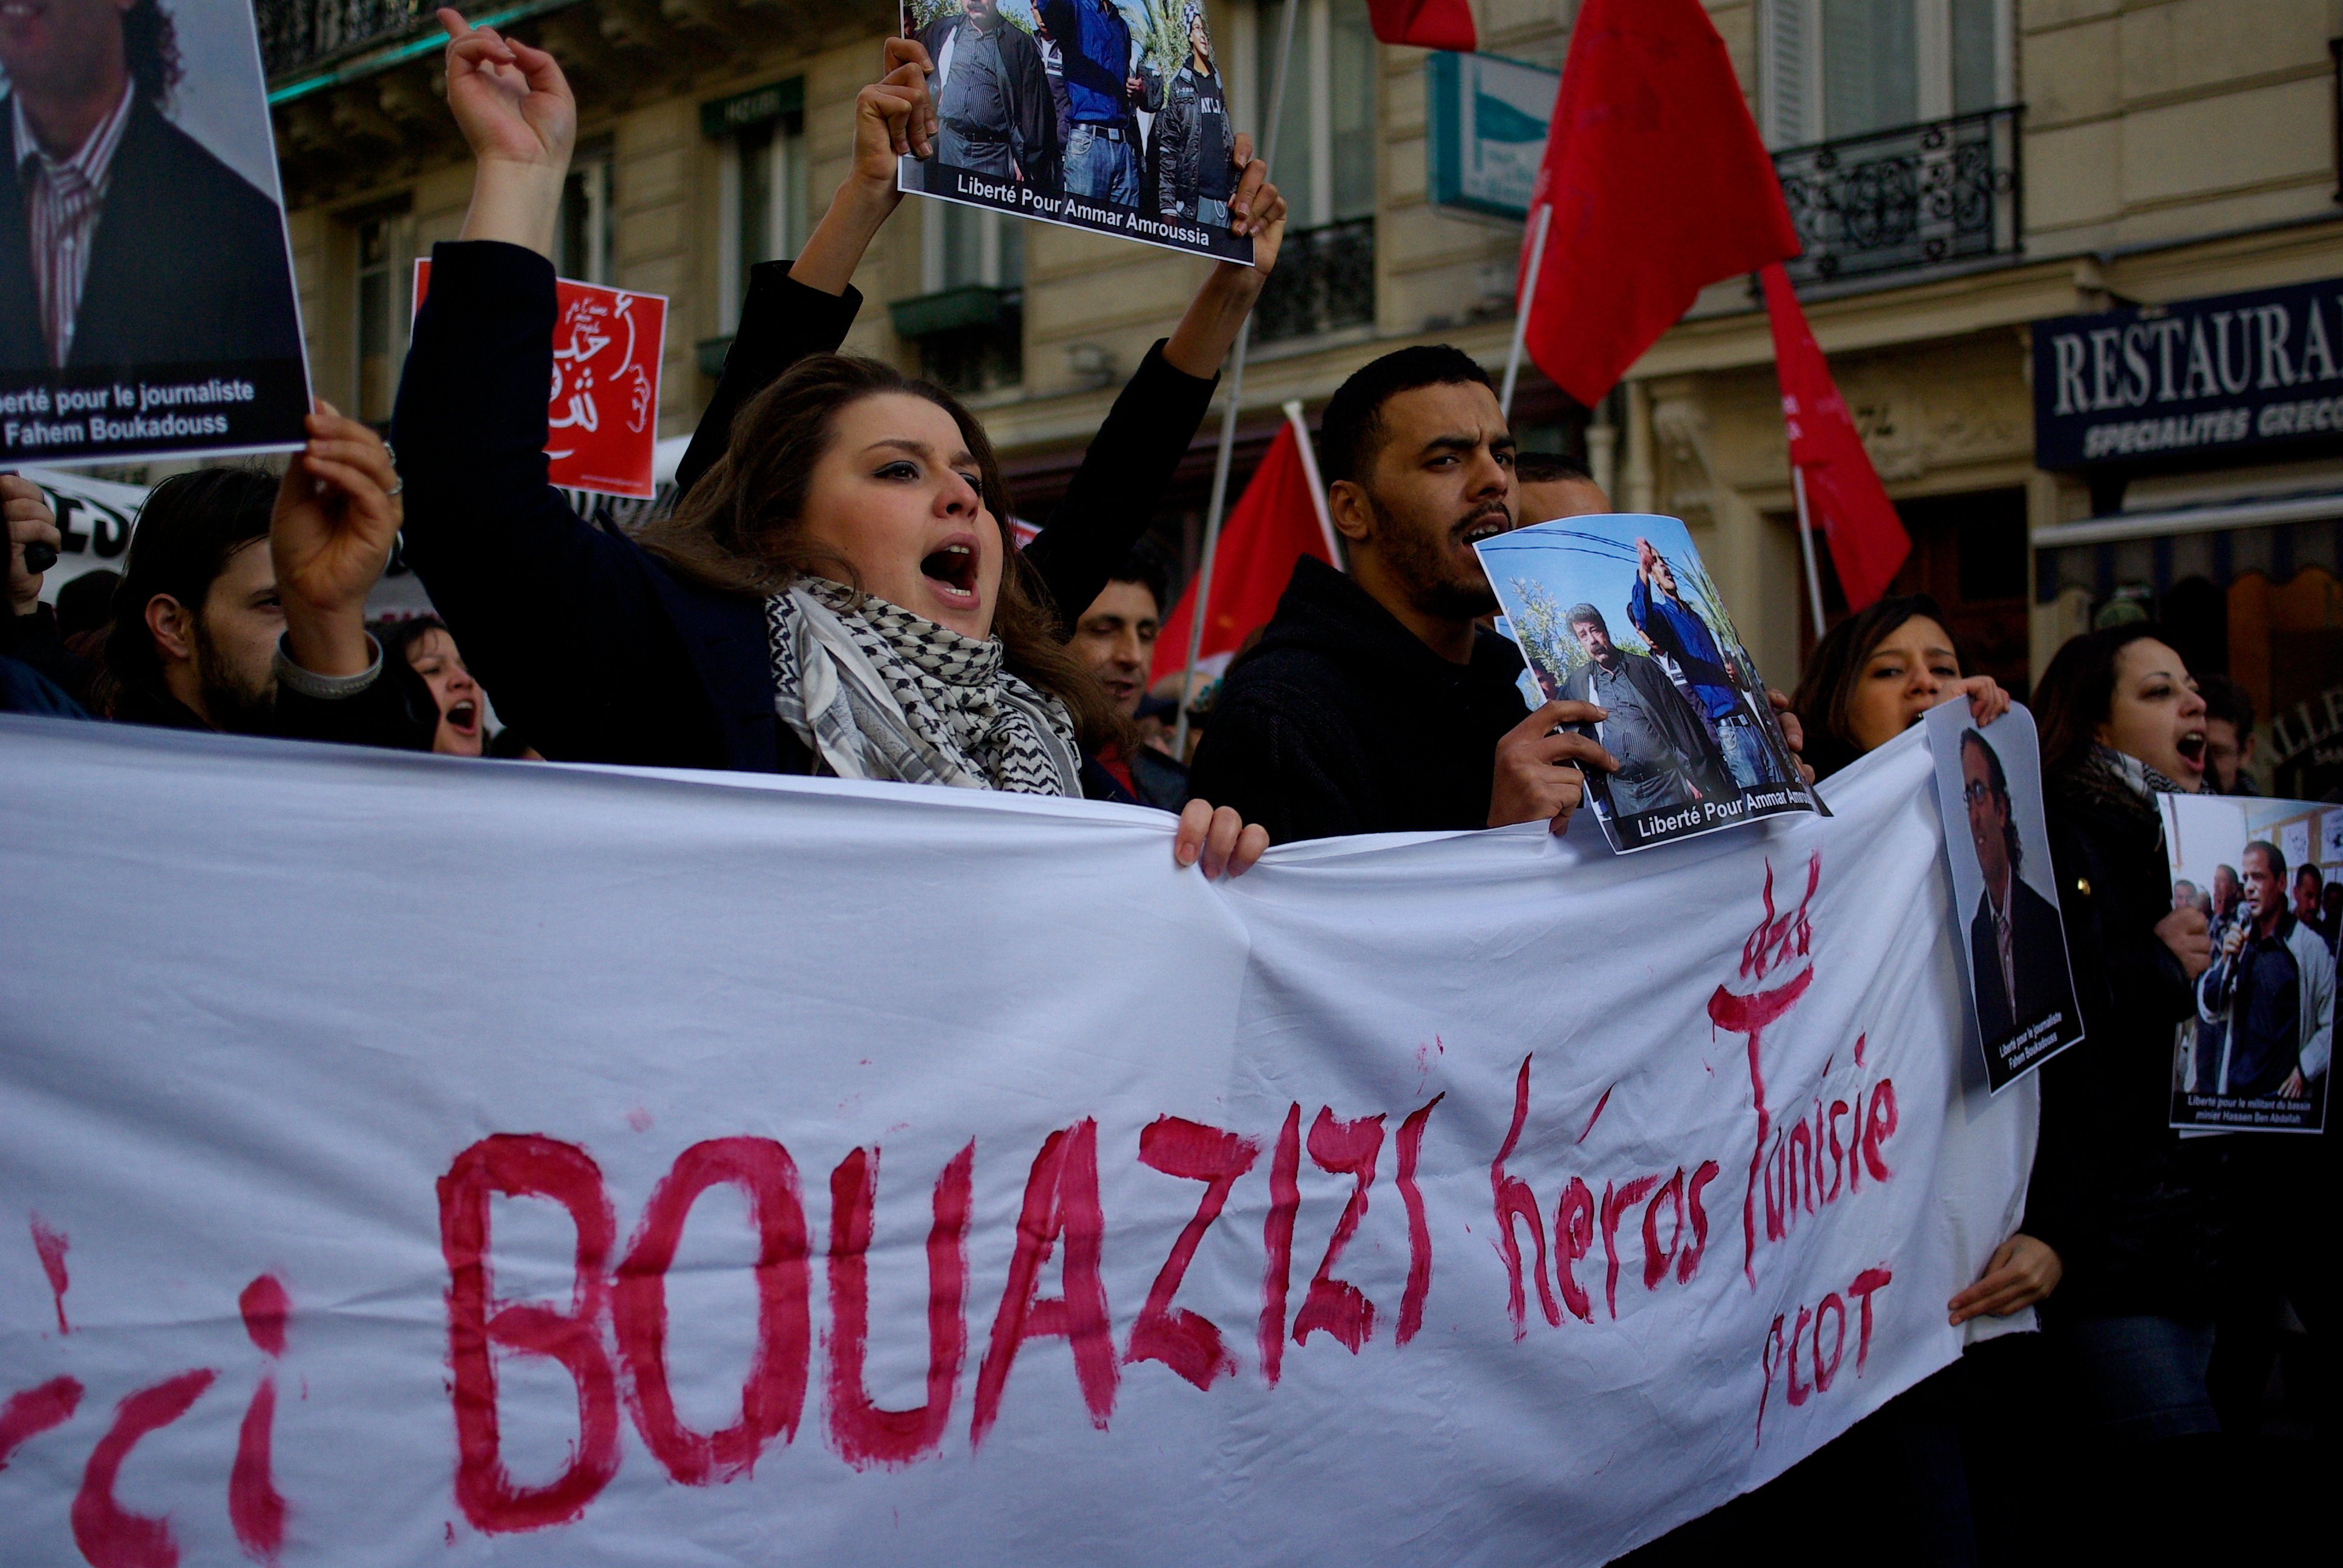 Paris. A French protest in support of Mohamed Bouazizi, "Hero of Tunisia."